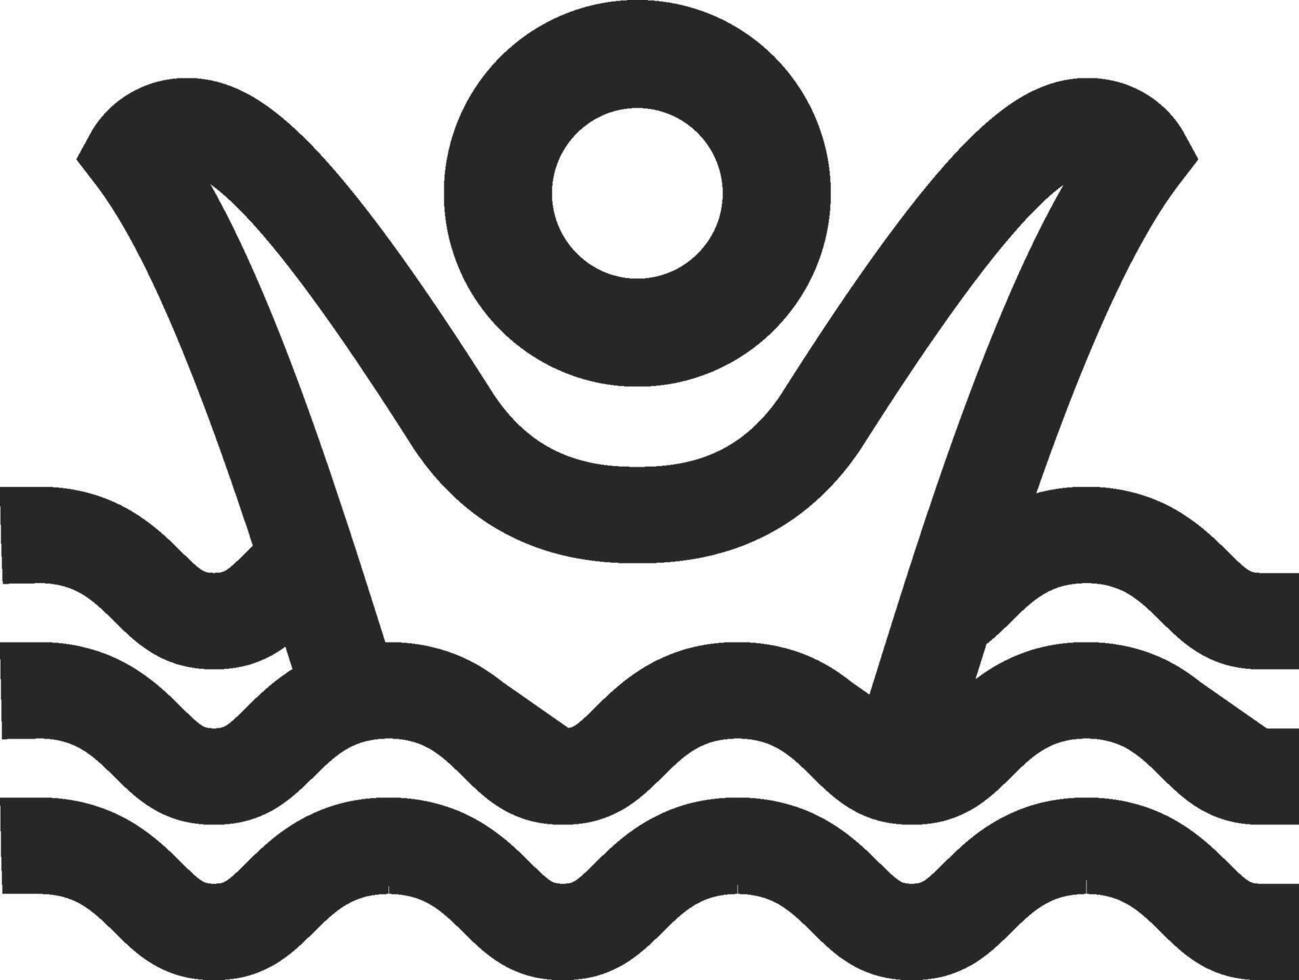 Drowned man icon in thick outline style. Black and white monochrome vector illustration.